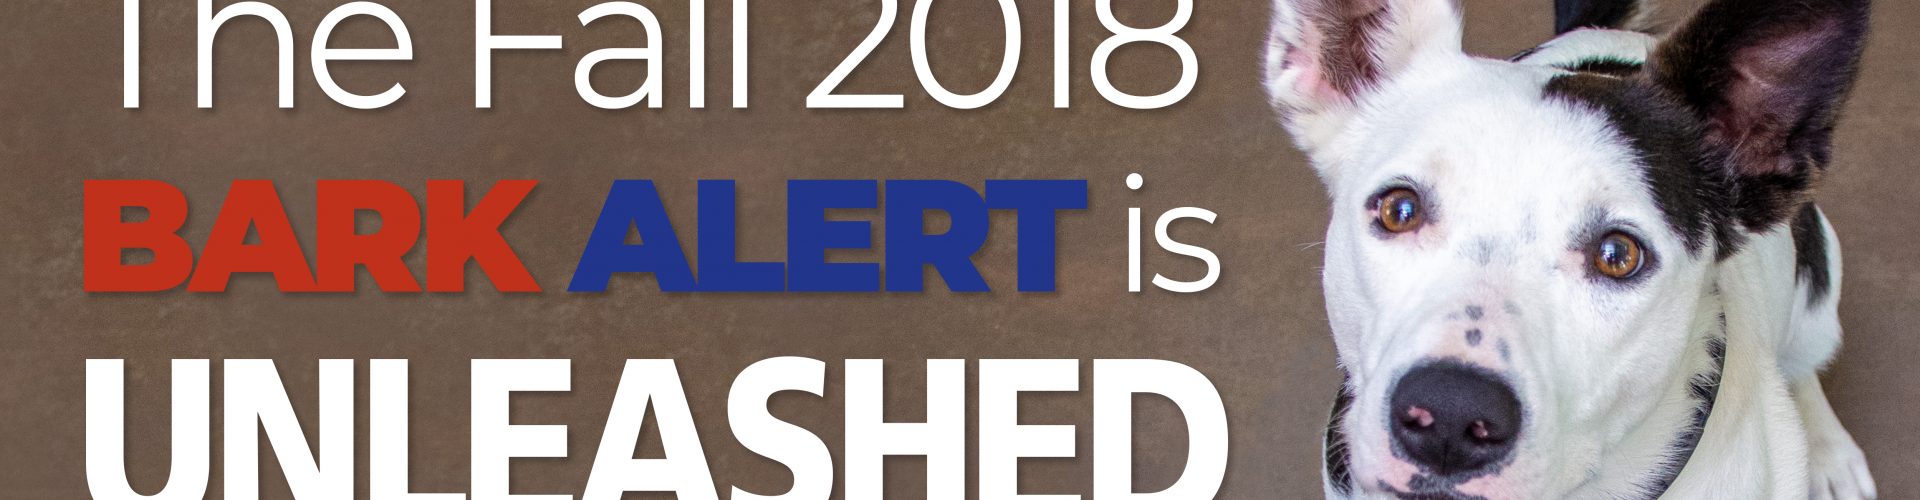 The Fall 2018 Bark Alert is Unleashed!